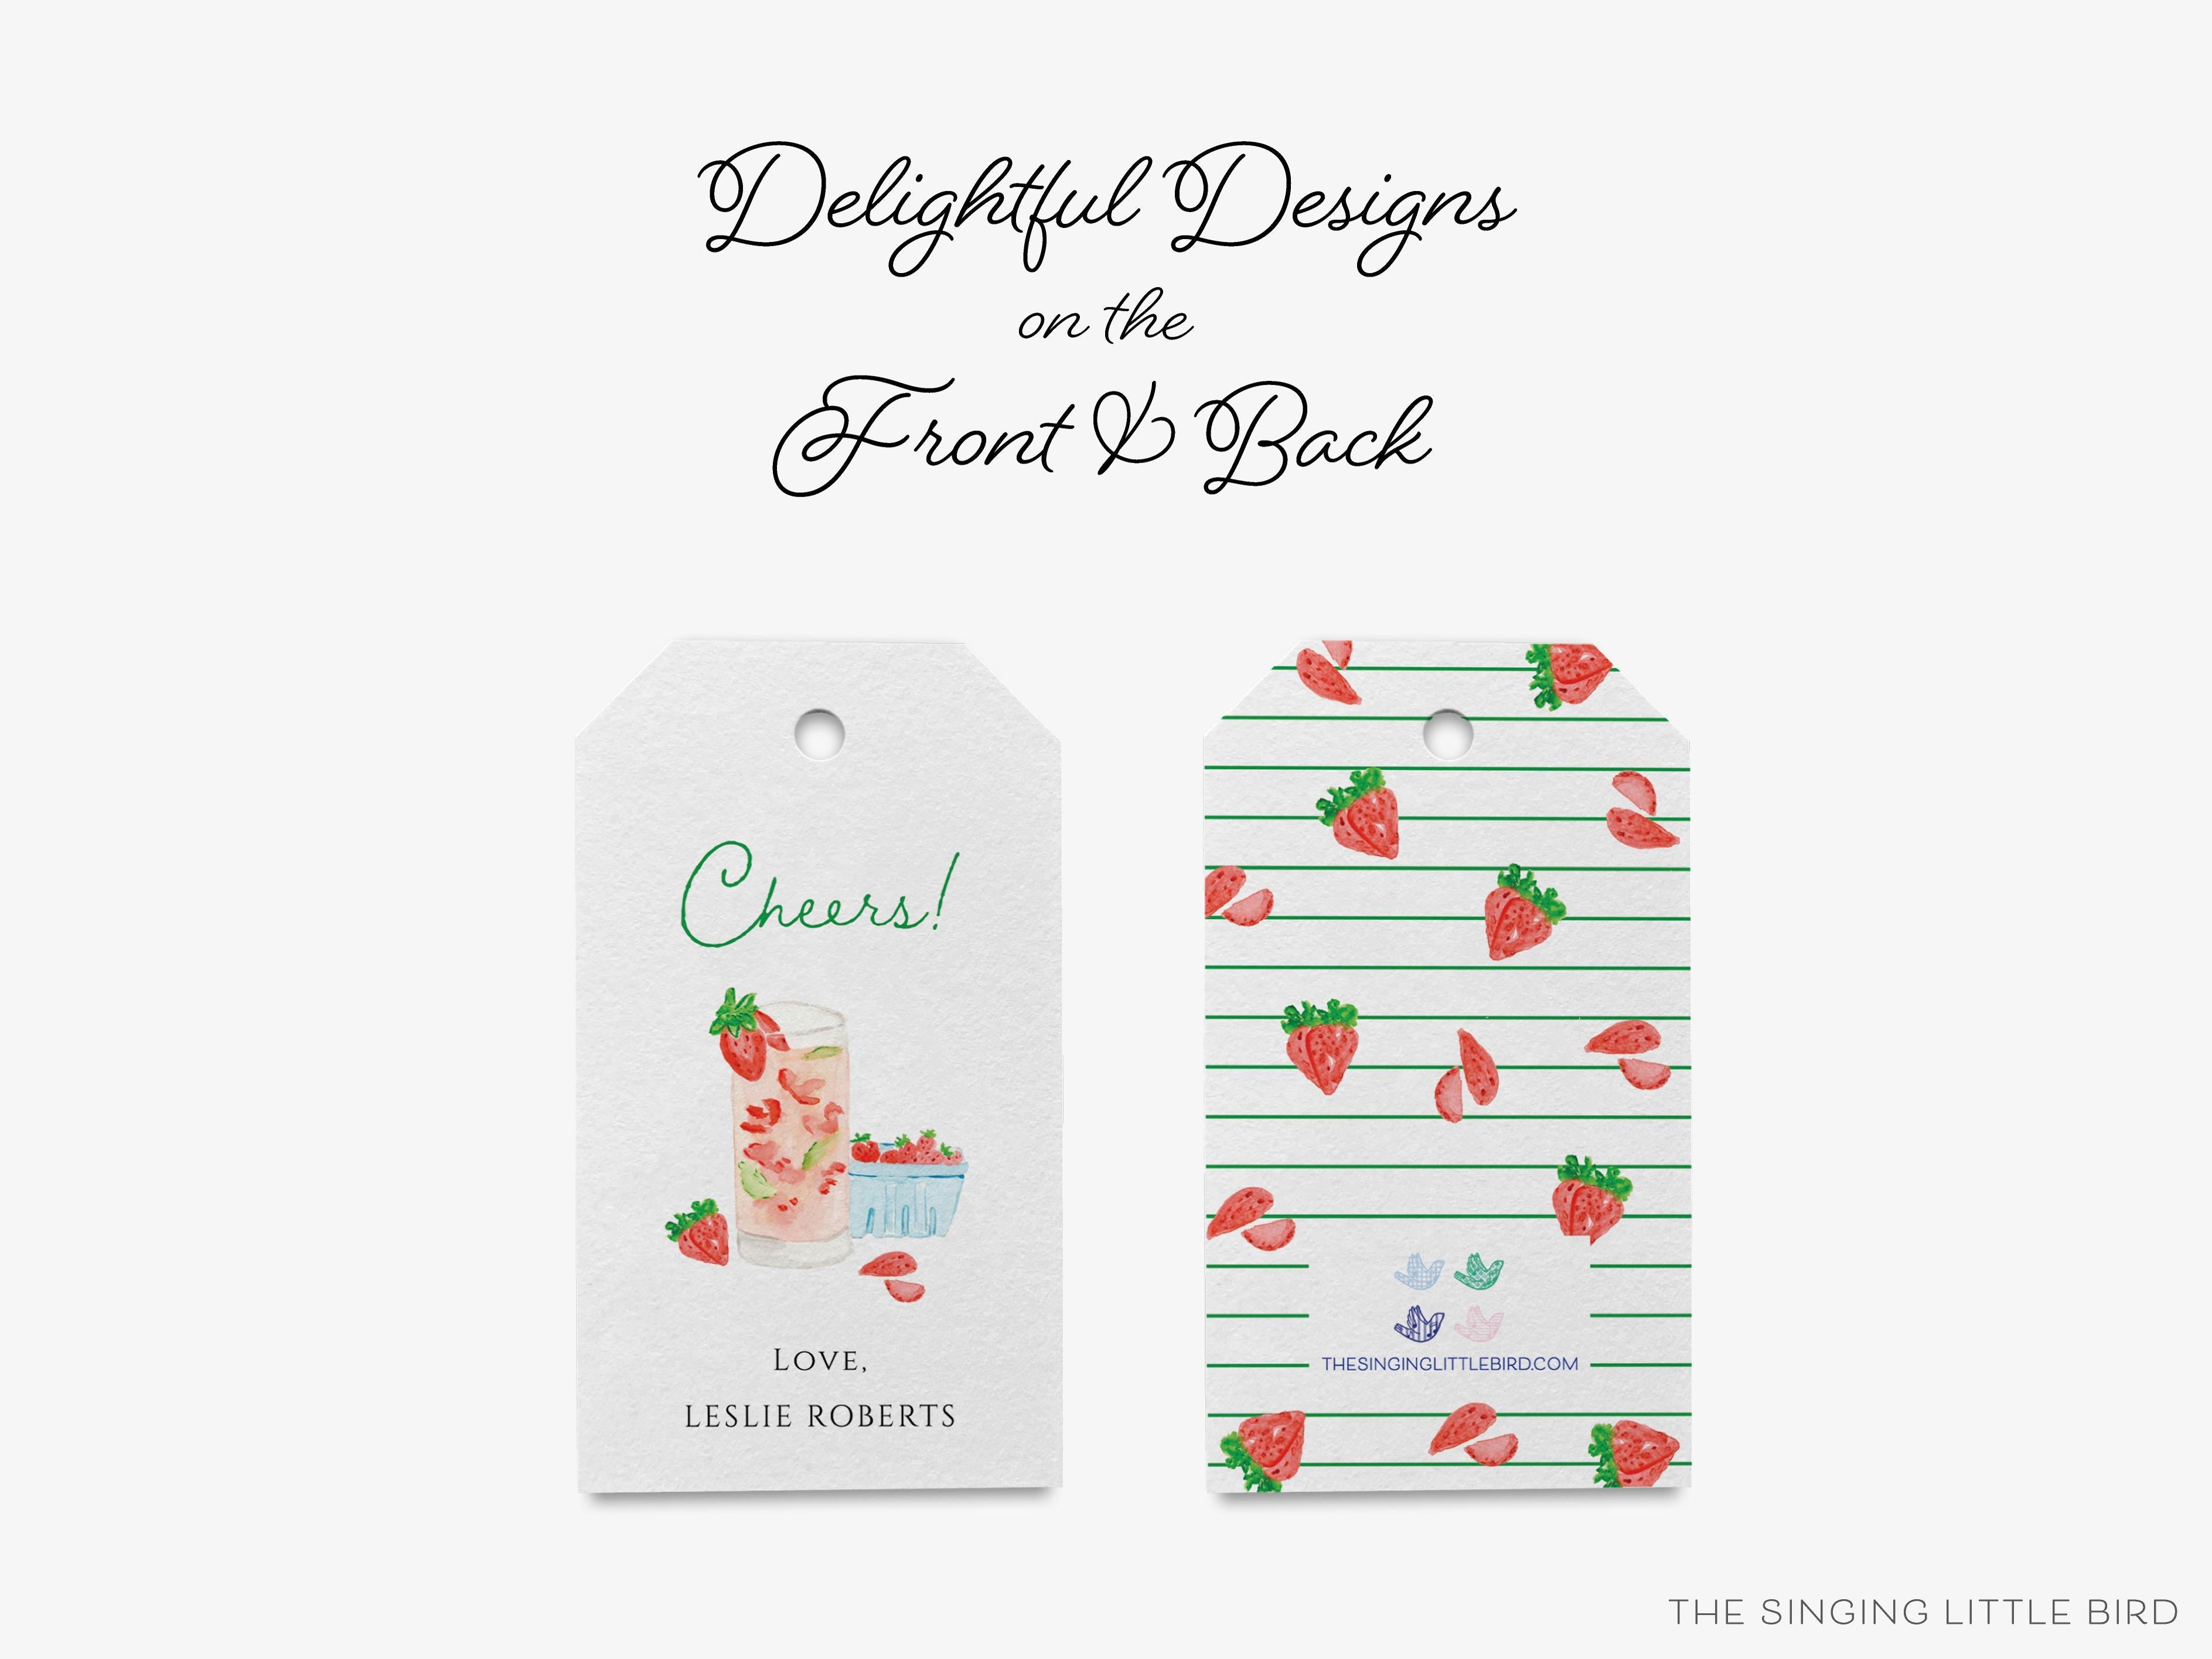 Personalized Strawberry Basil Cheers Gift Tags-These gift tags come in sets, hole-punched with white twine and feature our hand-painted watercolor strawberries and cocktail glass, printed in the USA on 120lb textured stock. They make great tags for gifting or gifts for the cocktail lover in your life.-The Singing Little Bird